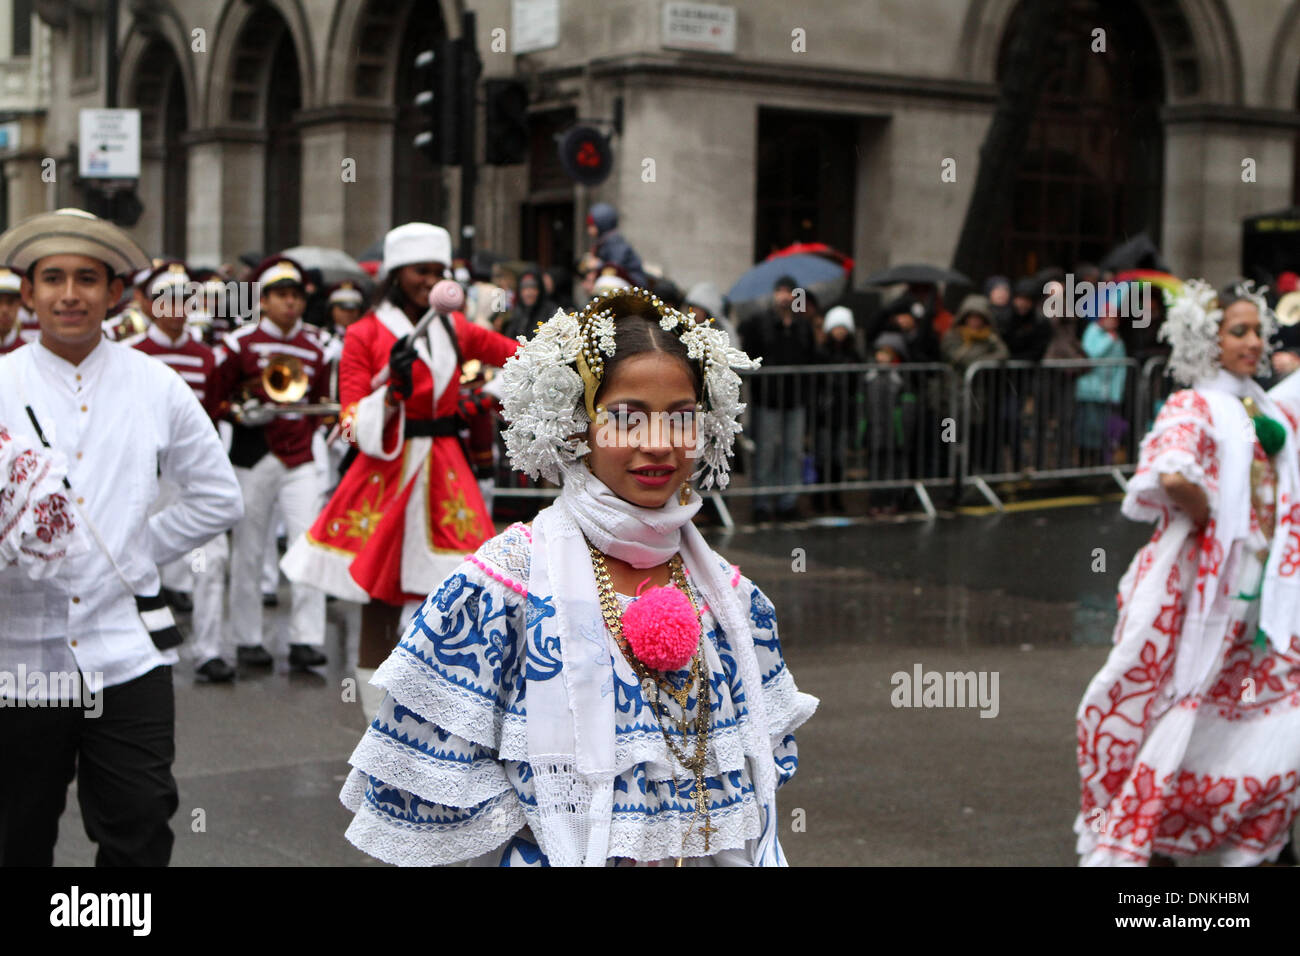 London,UK,1st January 2014,Dancers at the London's New Year's Day Parade 2014 Credit: Keith Larby/Alamy Live News Stock Photo